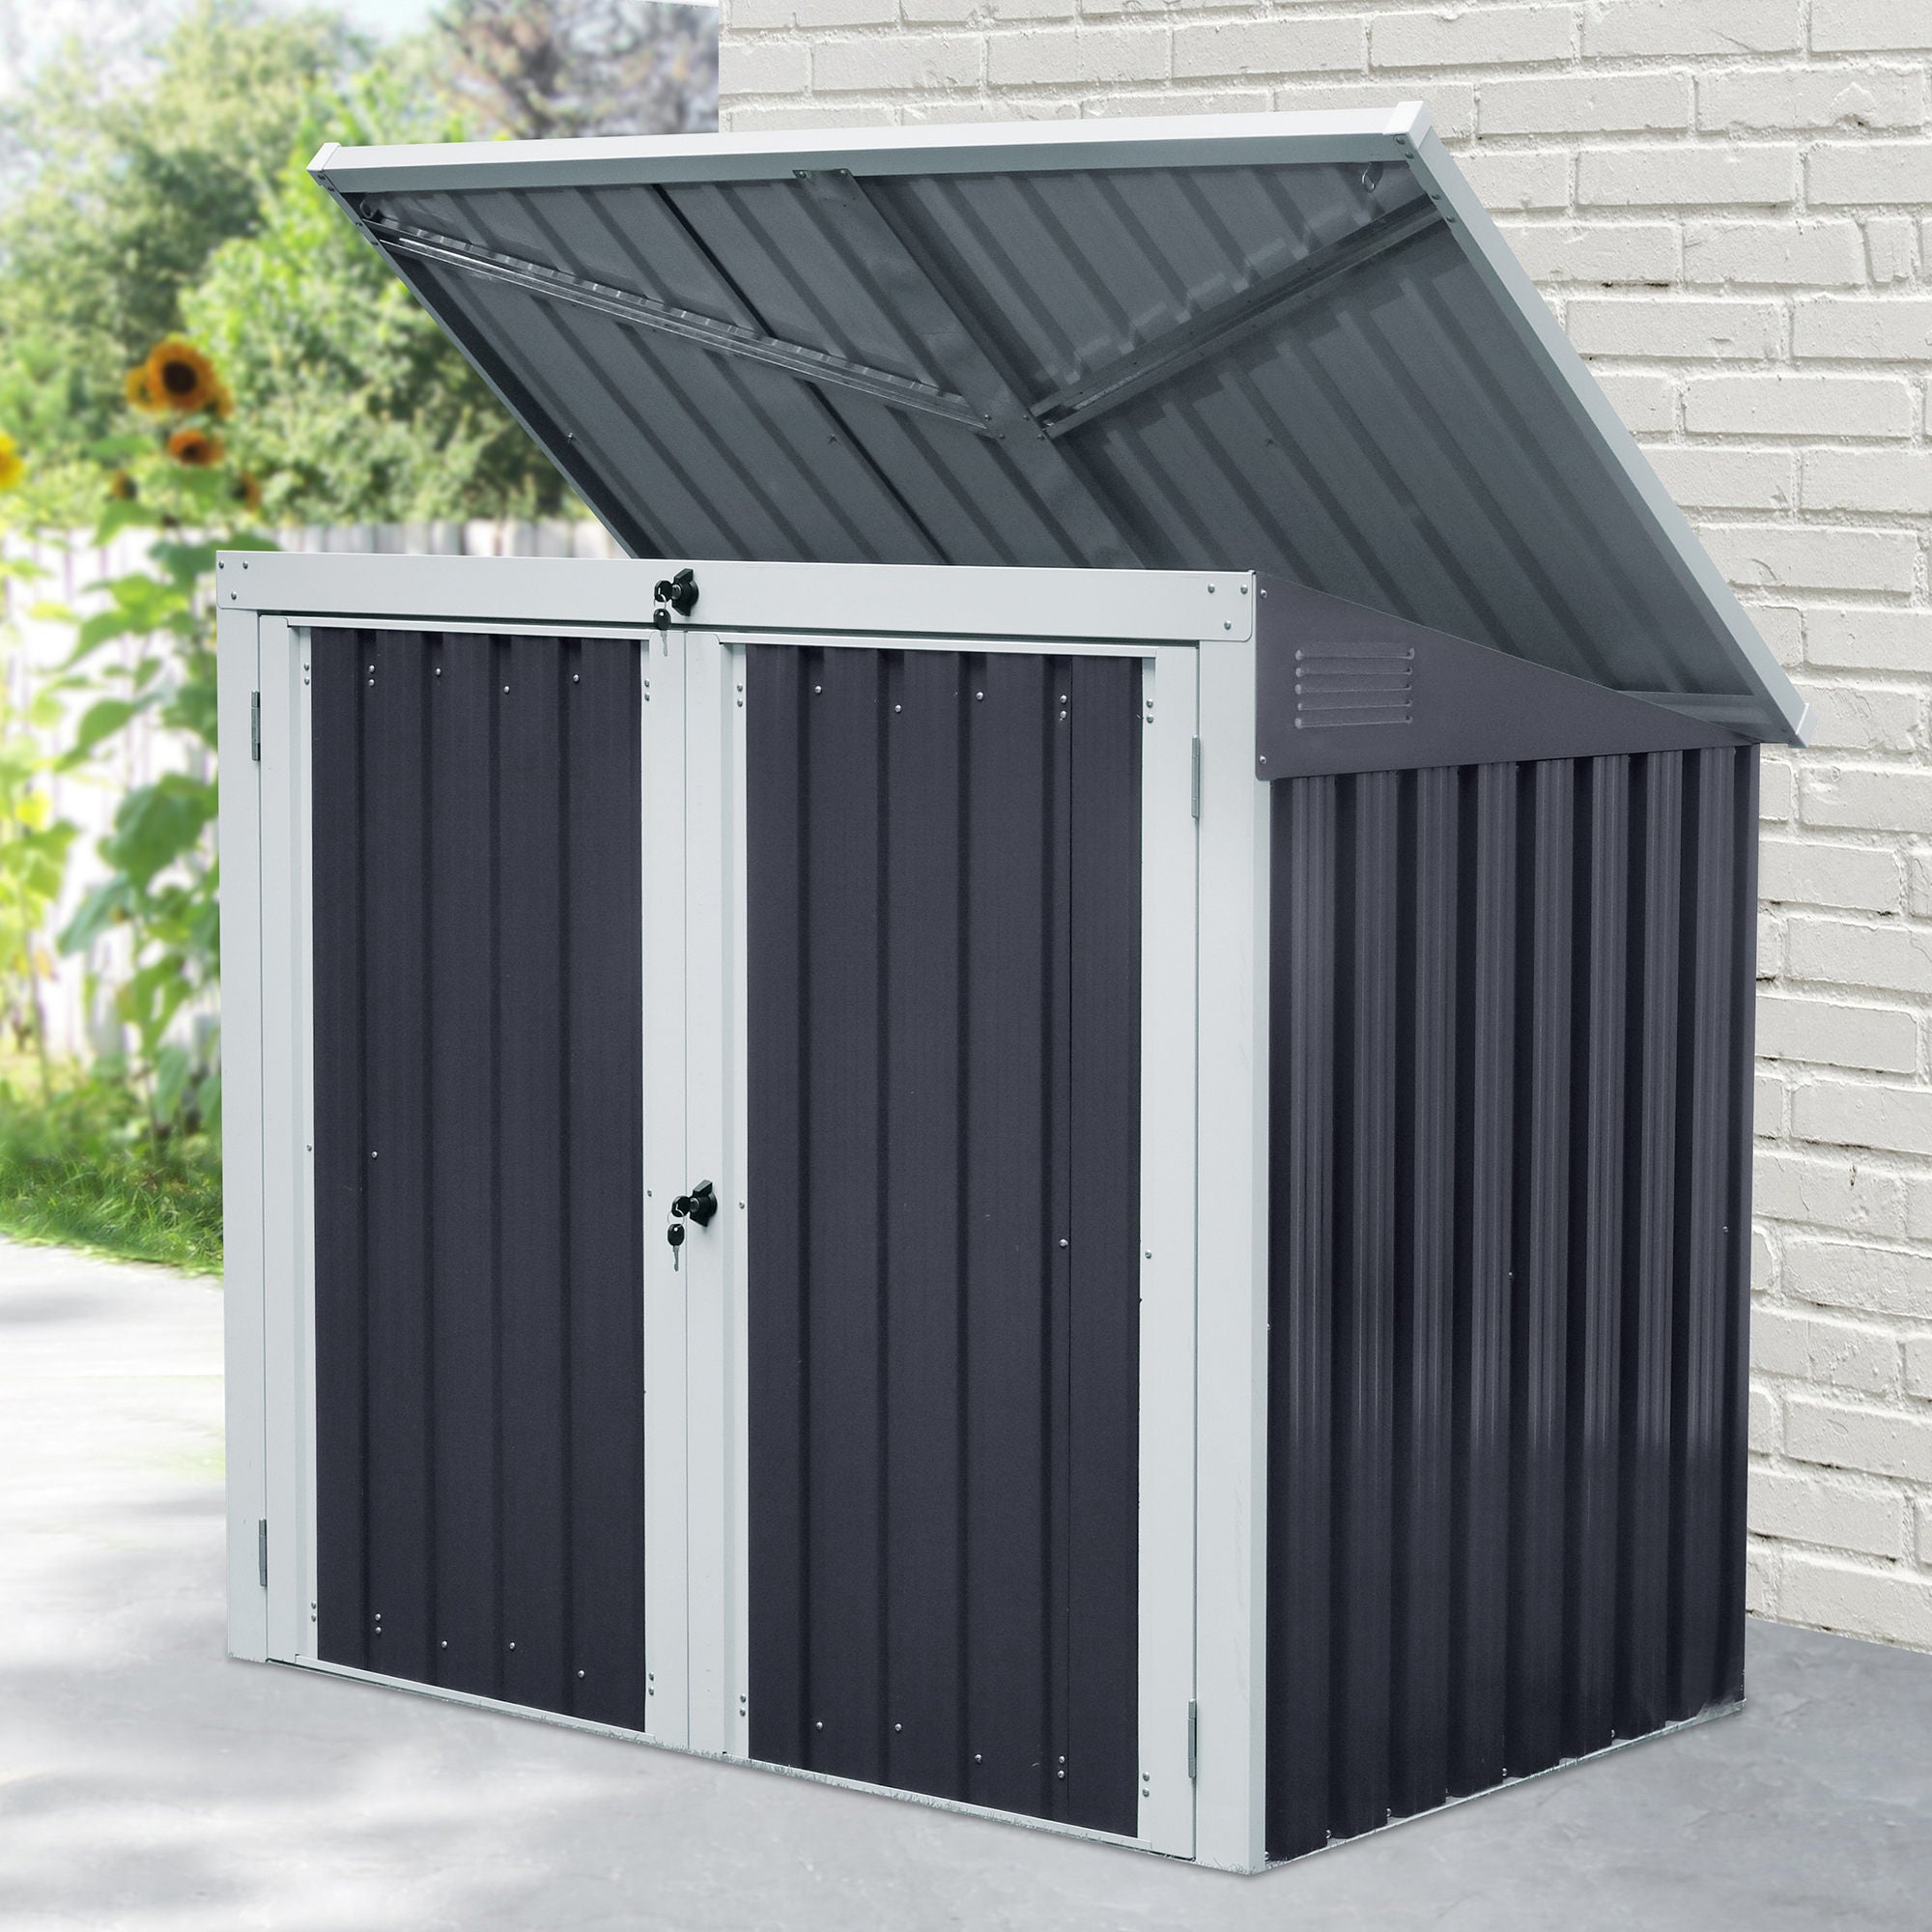 Outsunny 5ft x 3ft Garden 2-Bin Corrugated Steel Rubbish Storage Shed w/ Locking Doors Lid Outdoor Hygienic Dustbin Unit Garbage Trash Cover - Inspirely